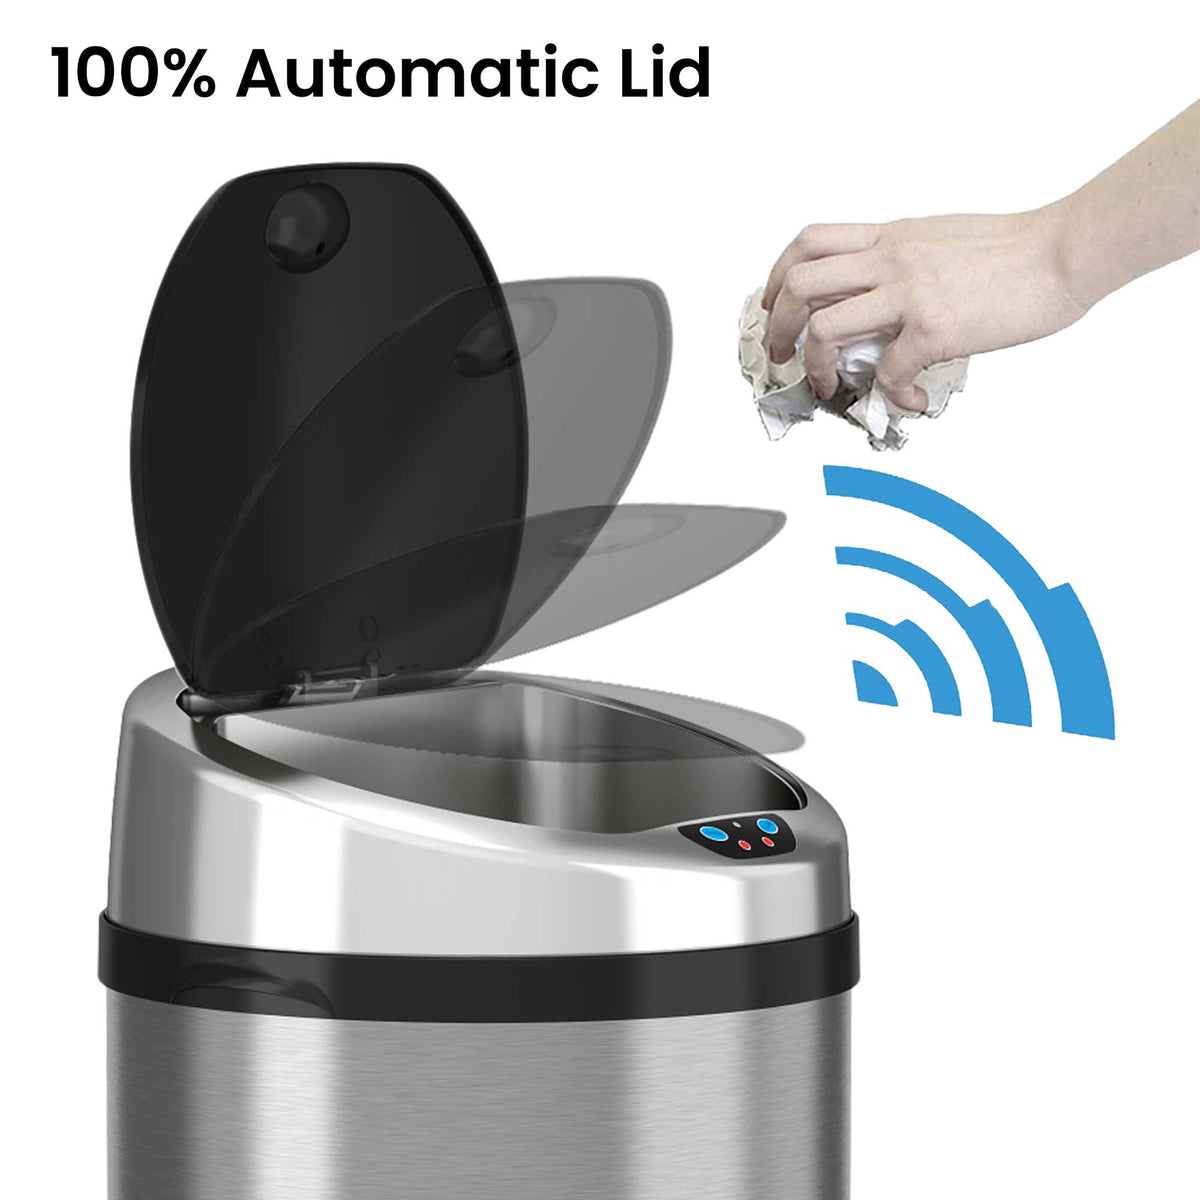 iTouchless 13 Gallon Stainless Steel Sensor Trash Can with Odor Filter 100% Automatic Lid